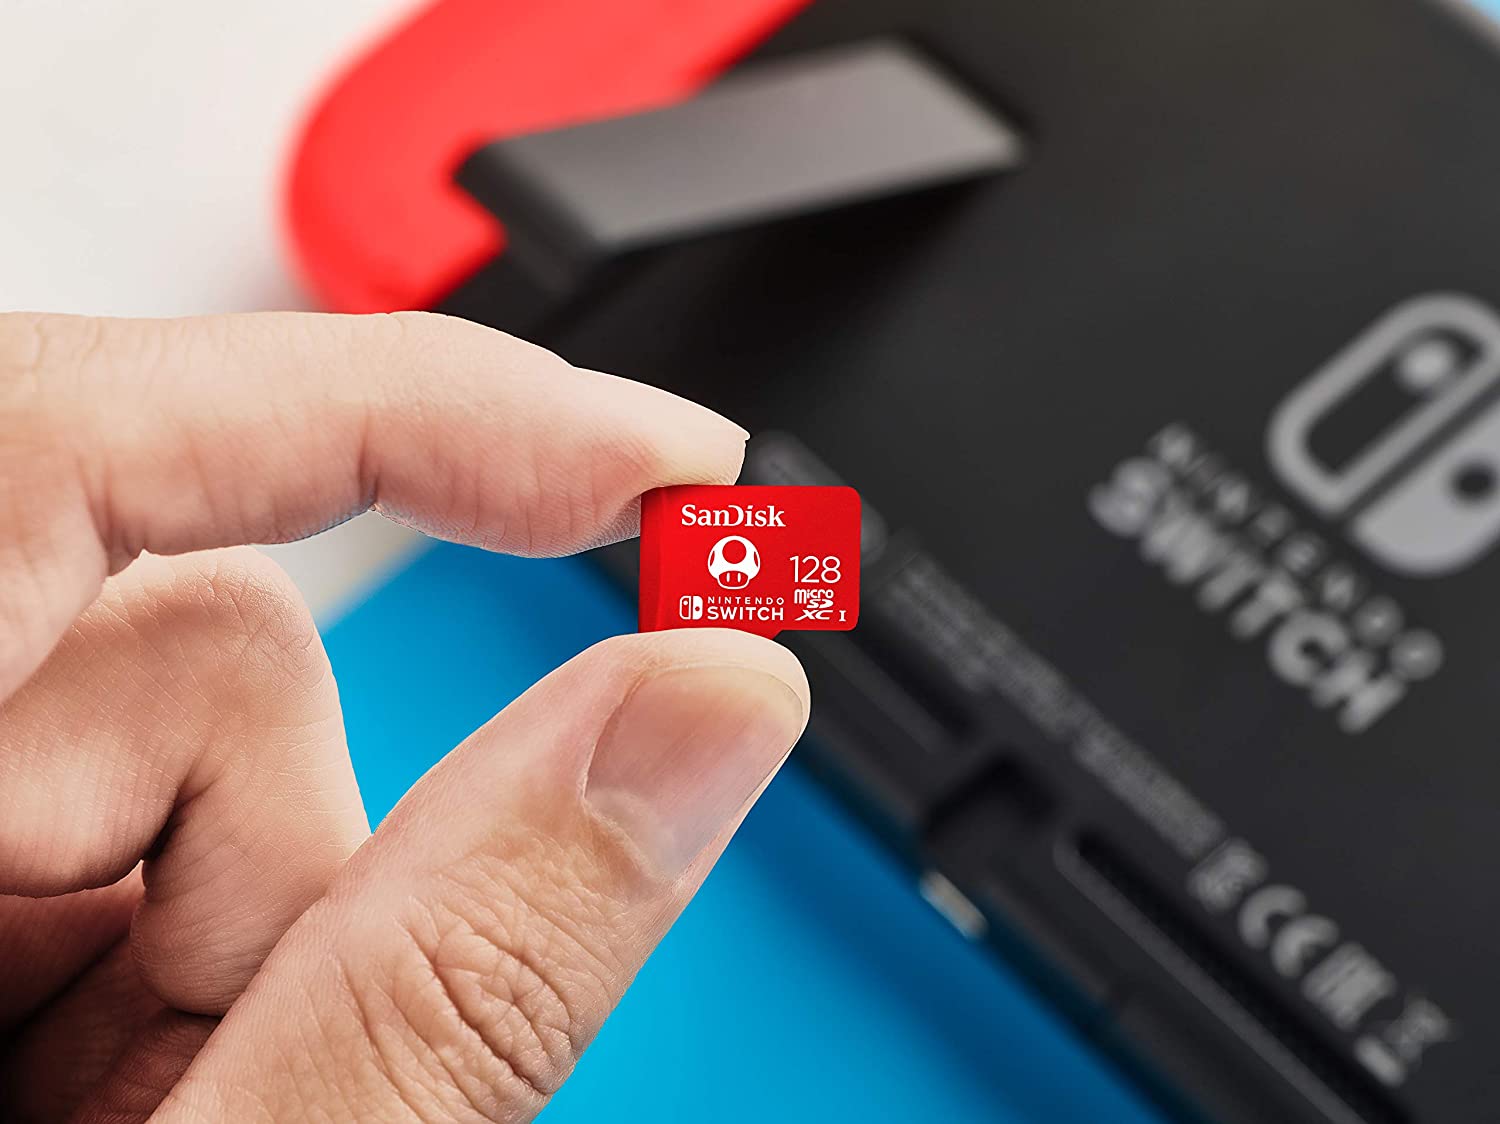 Amazon knocks half off a Nintendo Switch Online and microSD card bundle, The Gamers Dreams, thegamersdreams.com